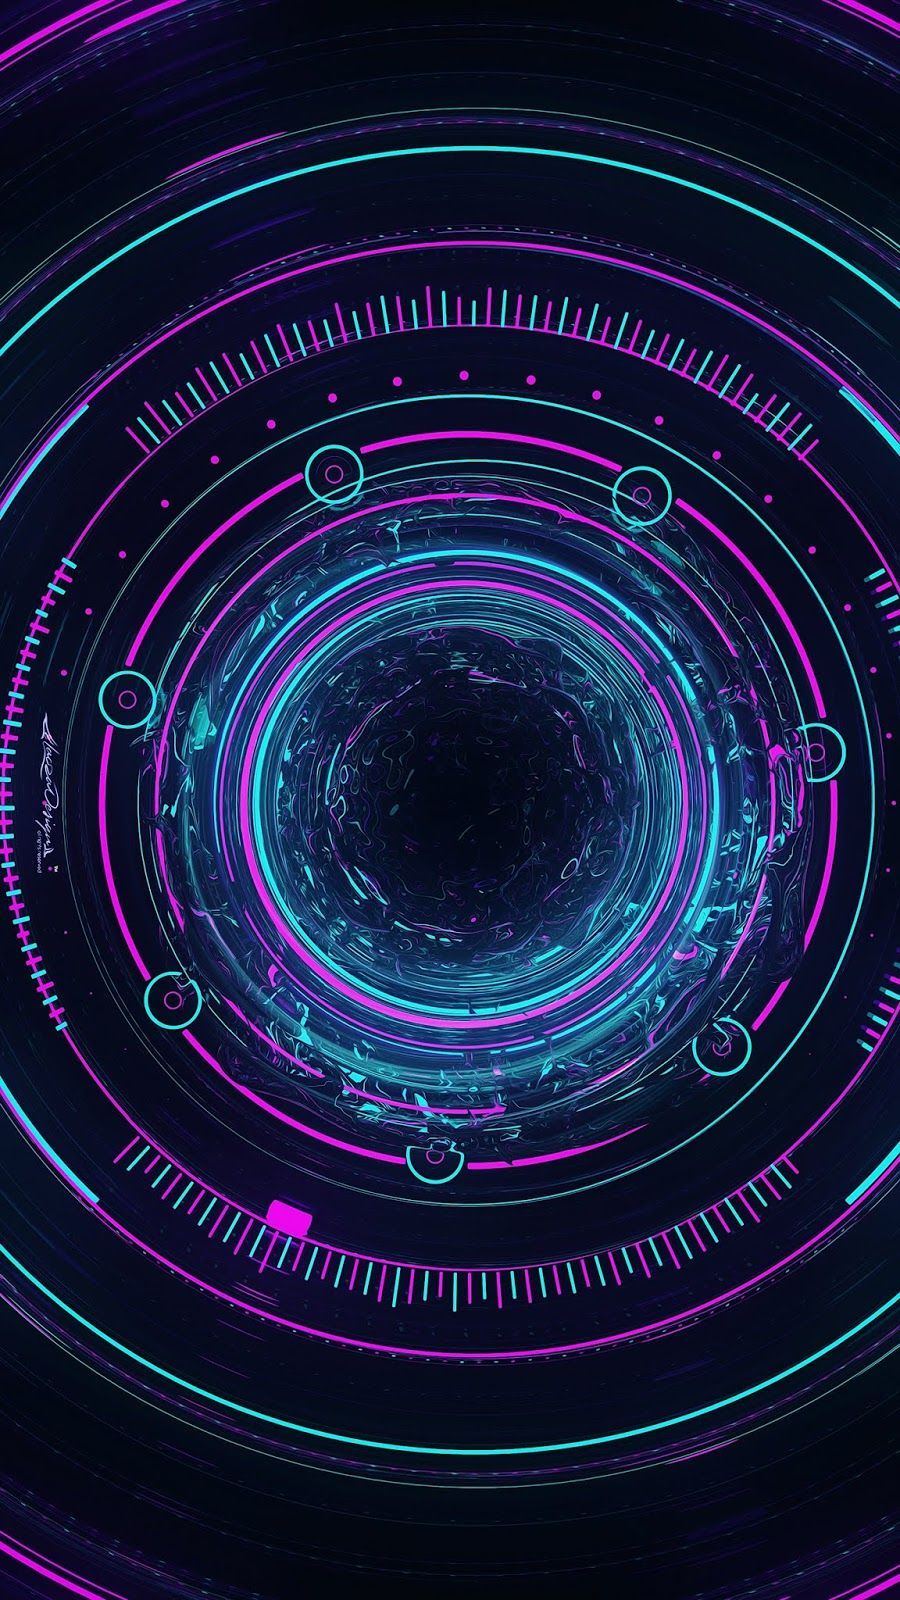 Abstract Circle #wallpaper #iphone #android #background #followme. Technology wallpaper, Neon wallpaper, Android wallpaper